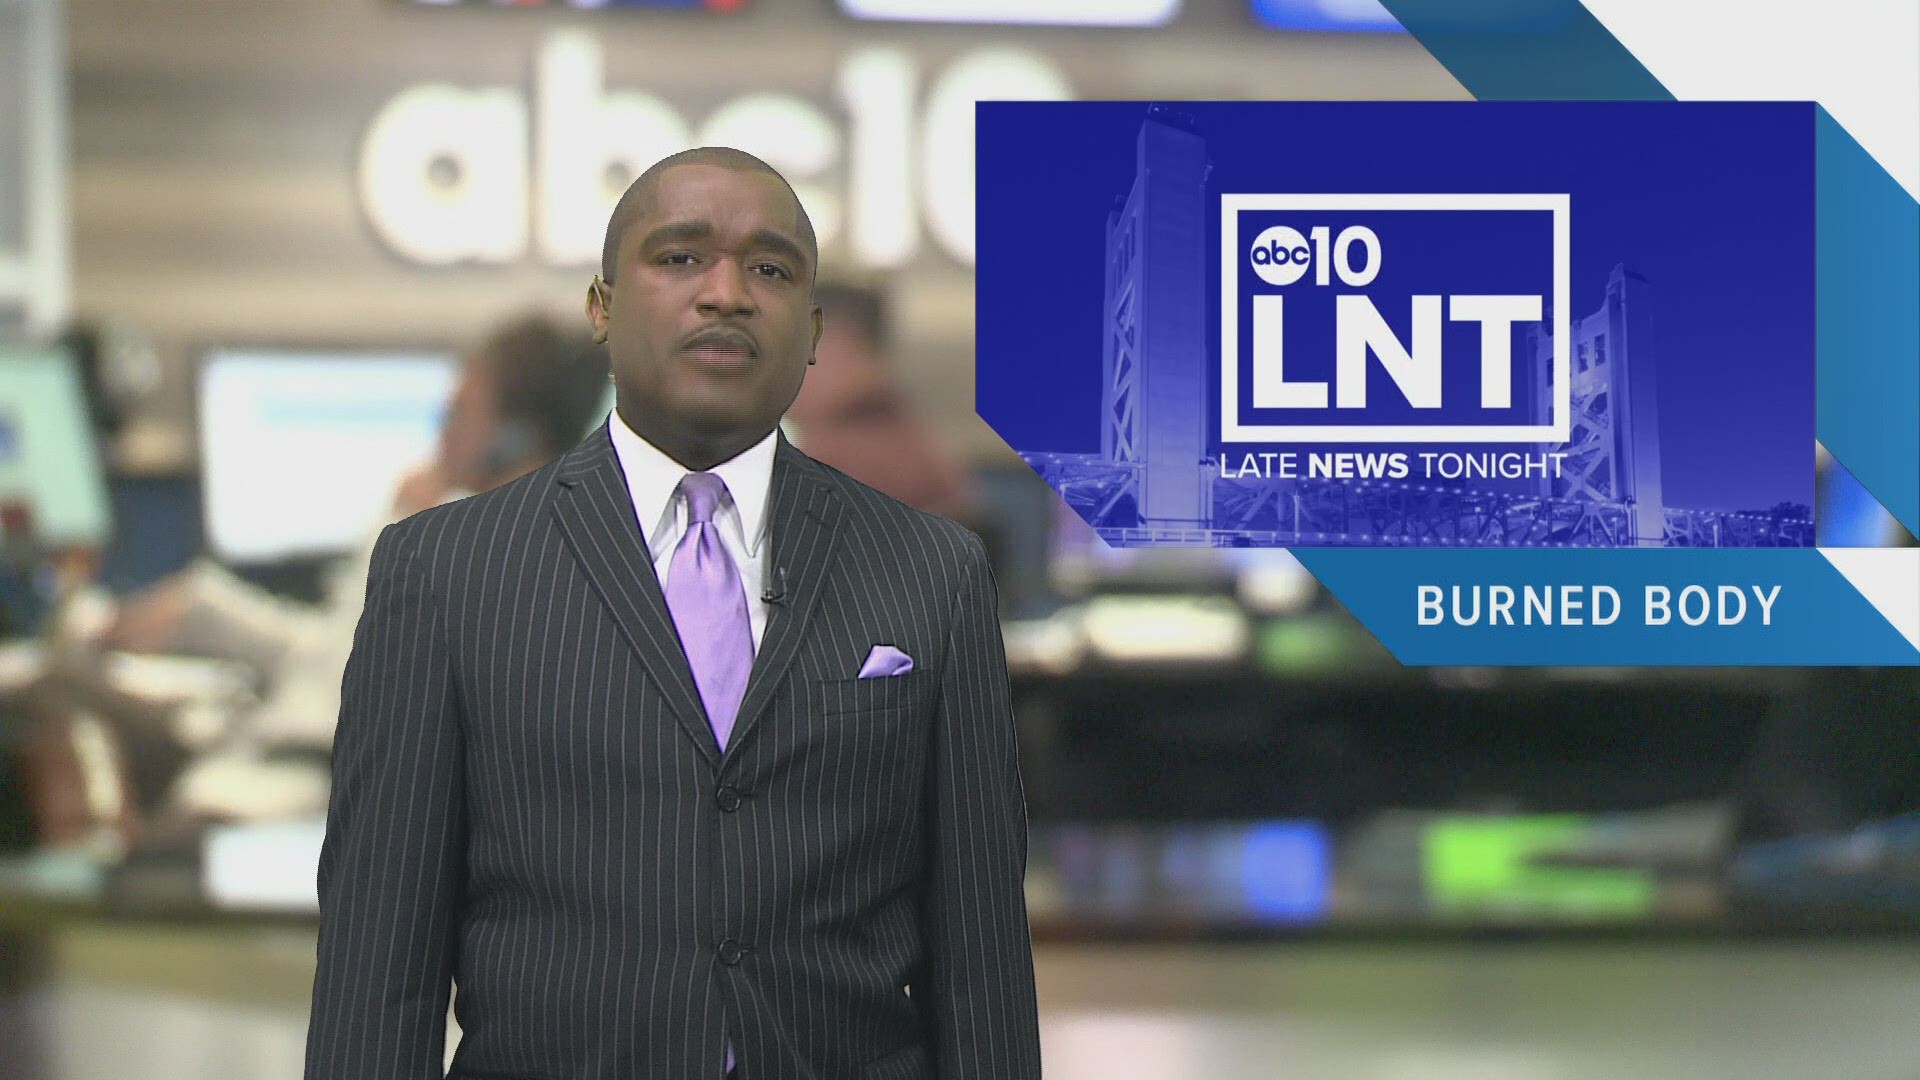 Evening Headlines: July 24, 2019 | Catch in-depth reporting on #LateNewsTonight at 11 p.m. | The latest Sacramento news is always at www.abc10.com.